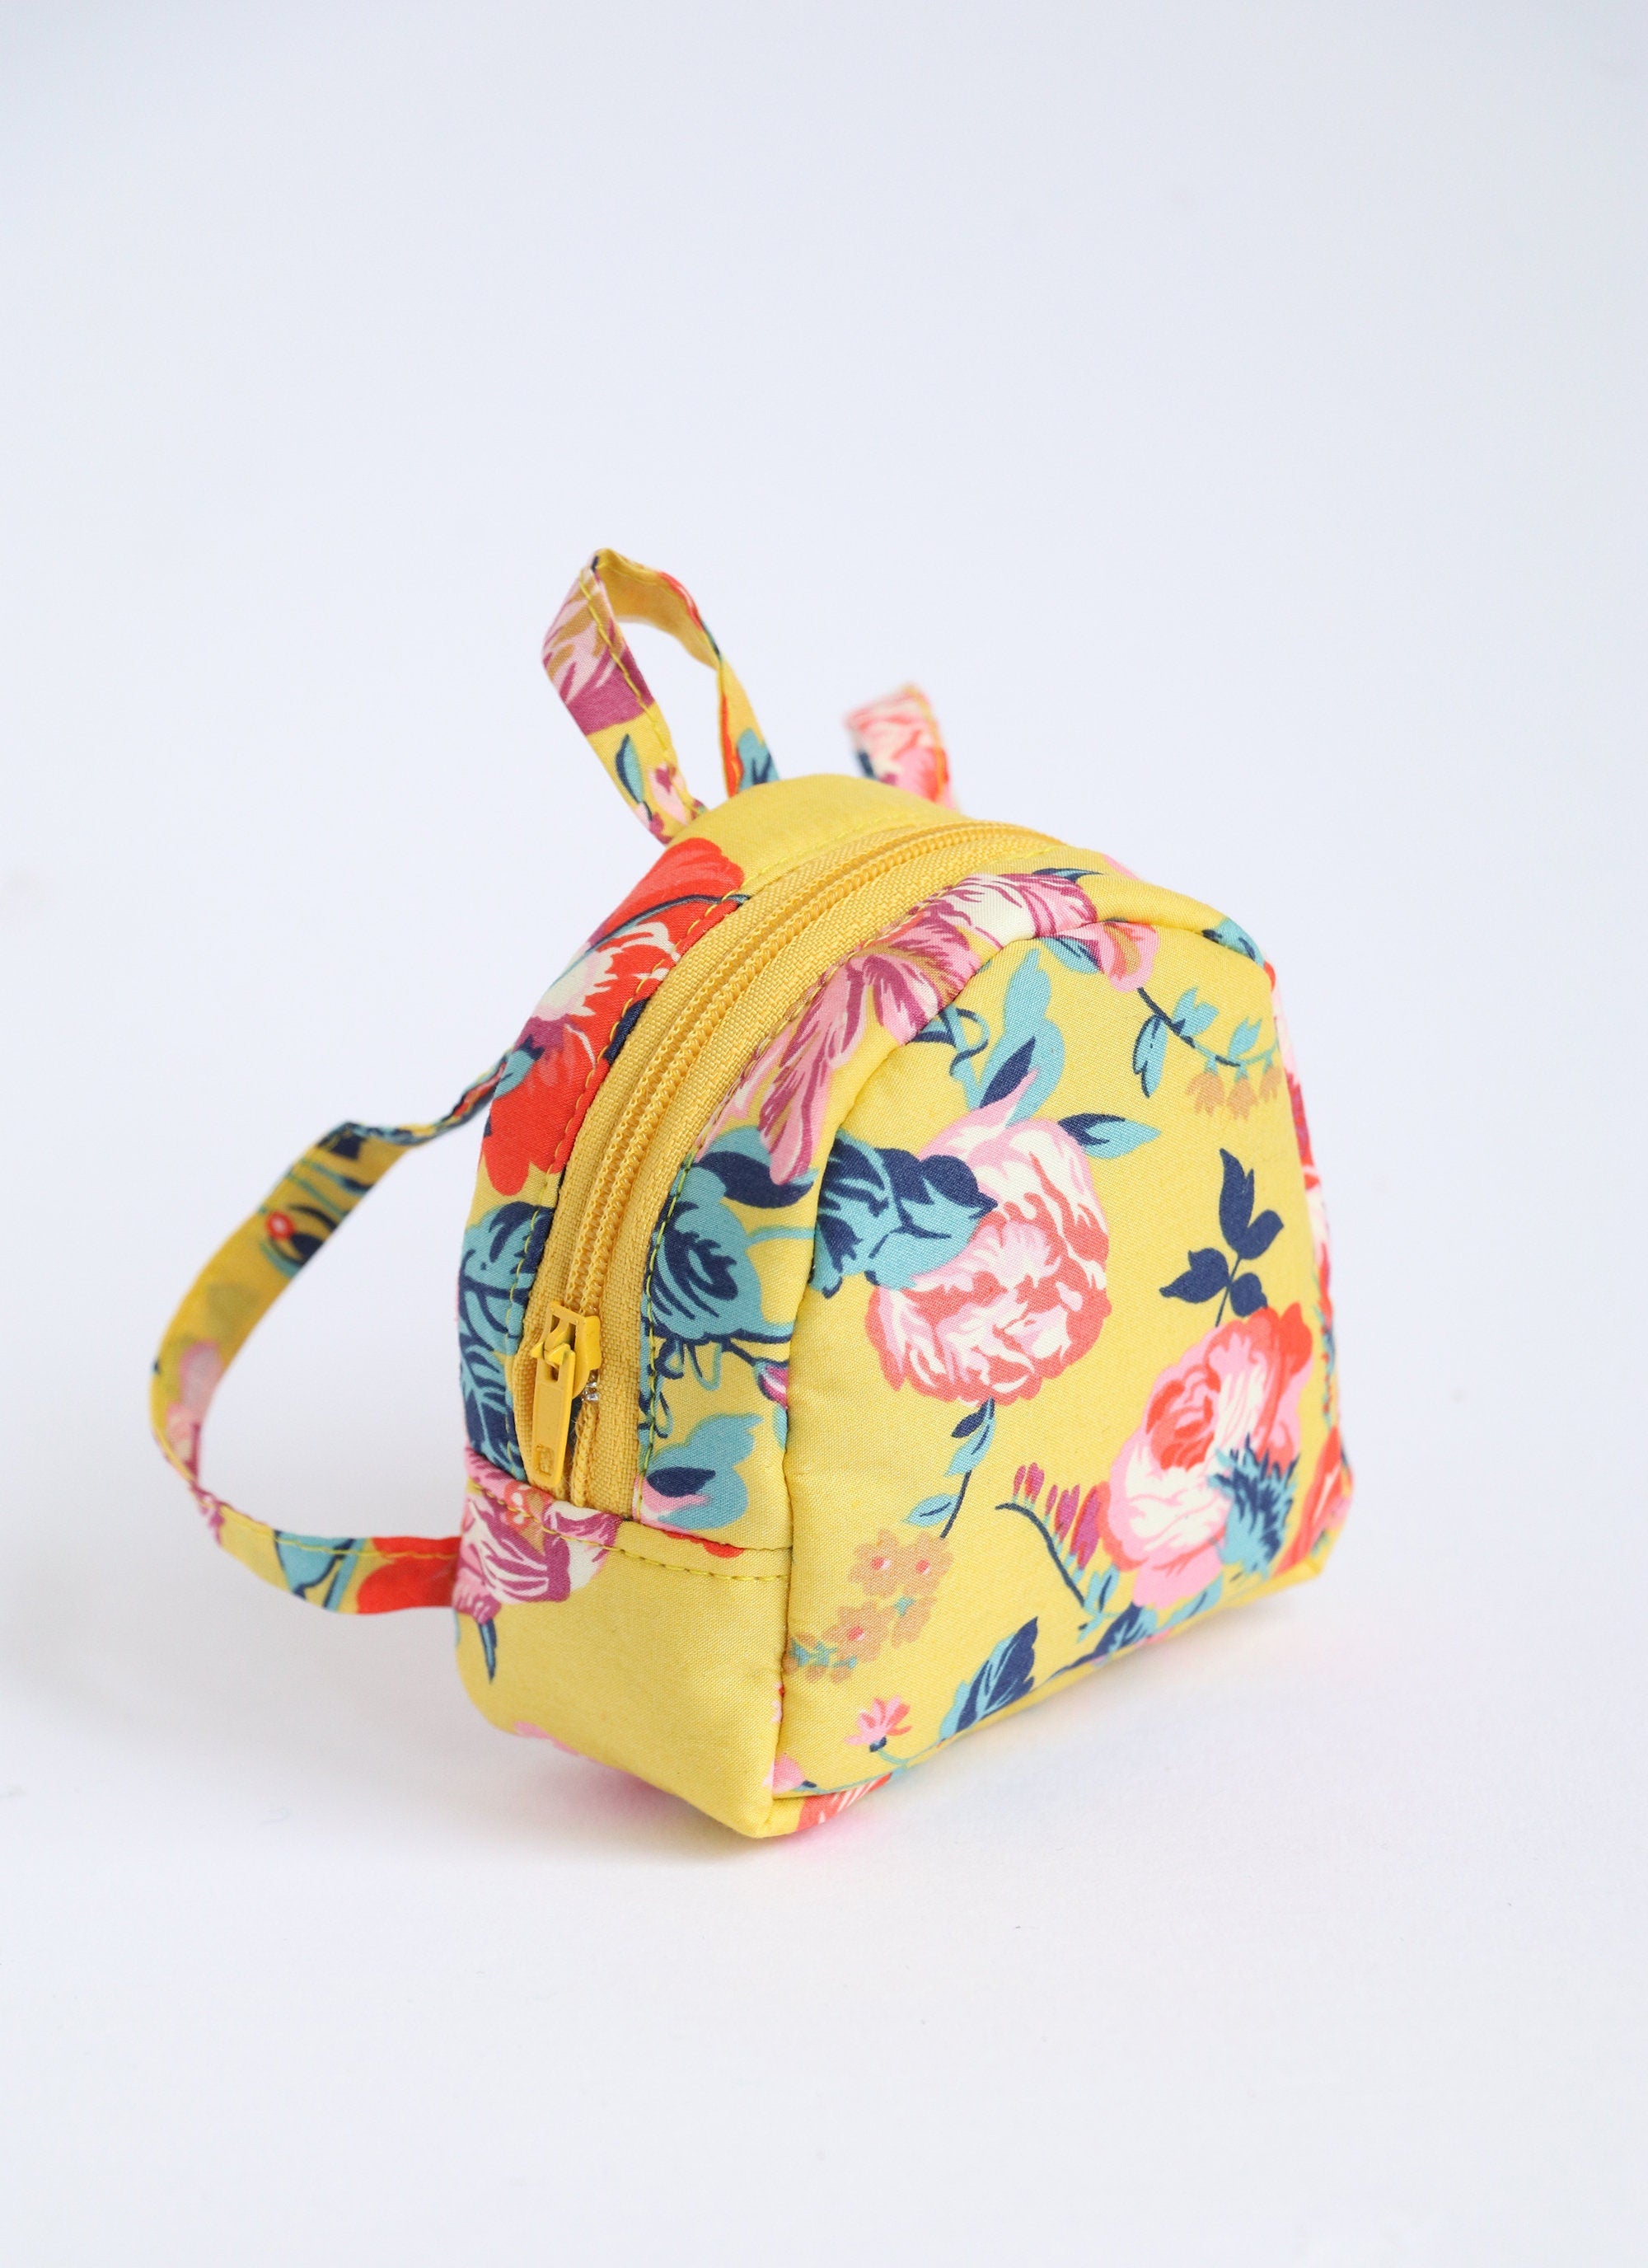 Miniature backpack in yellow